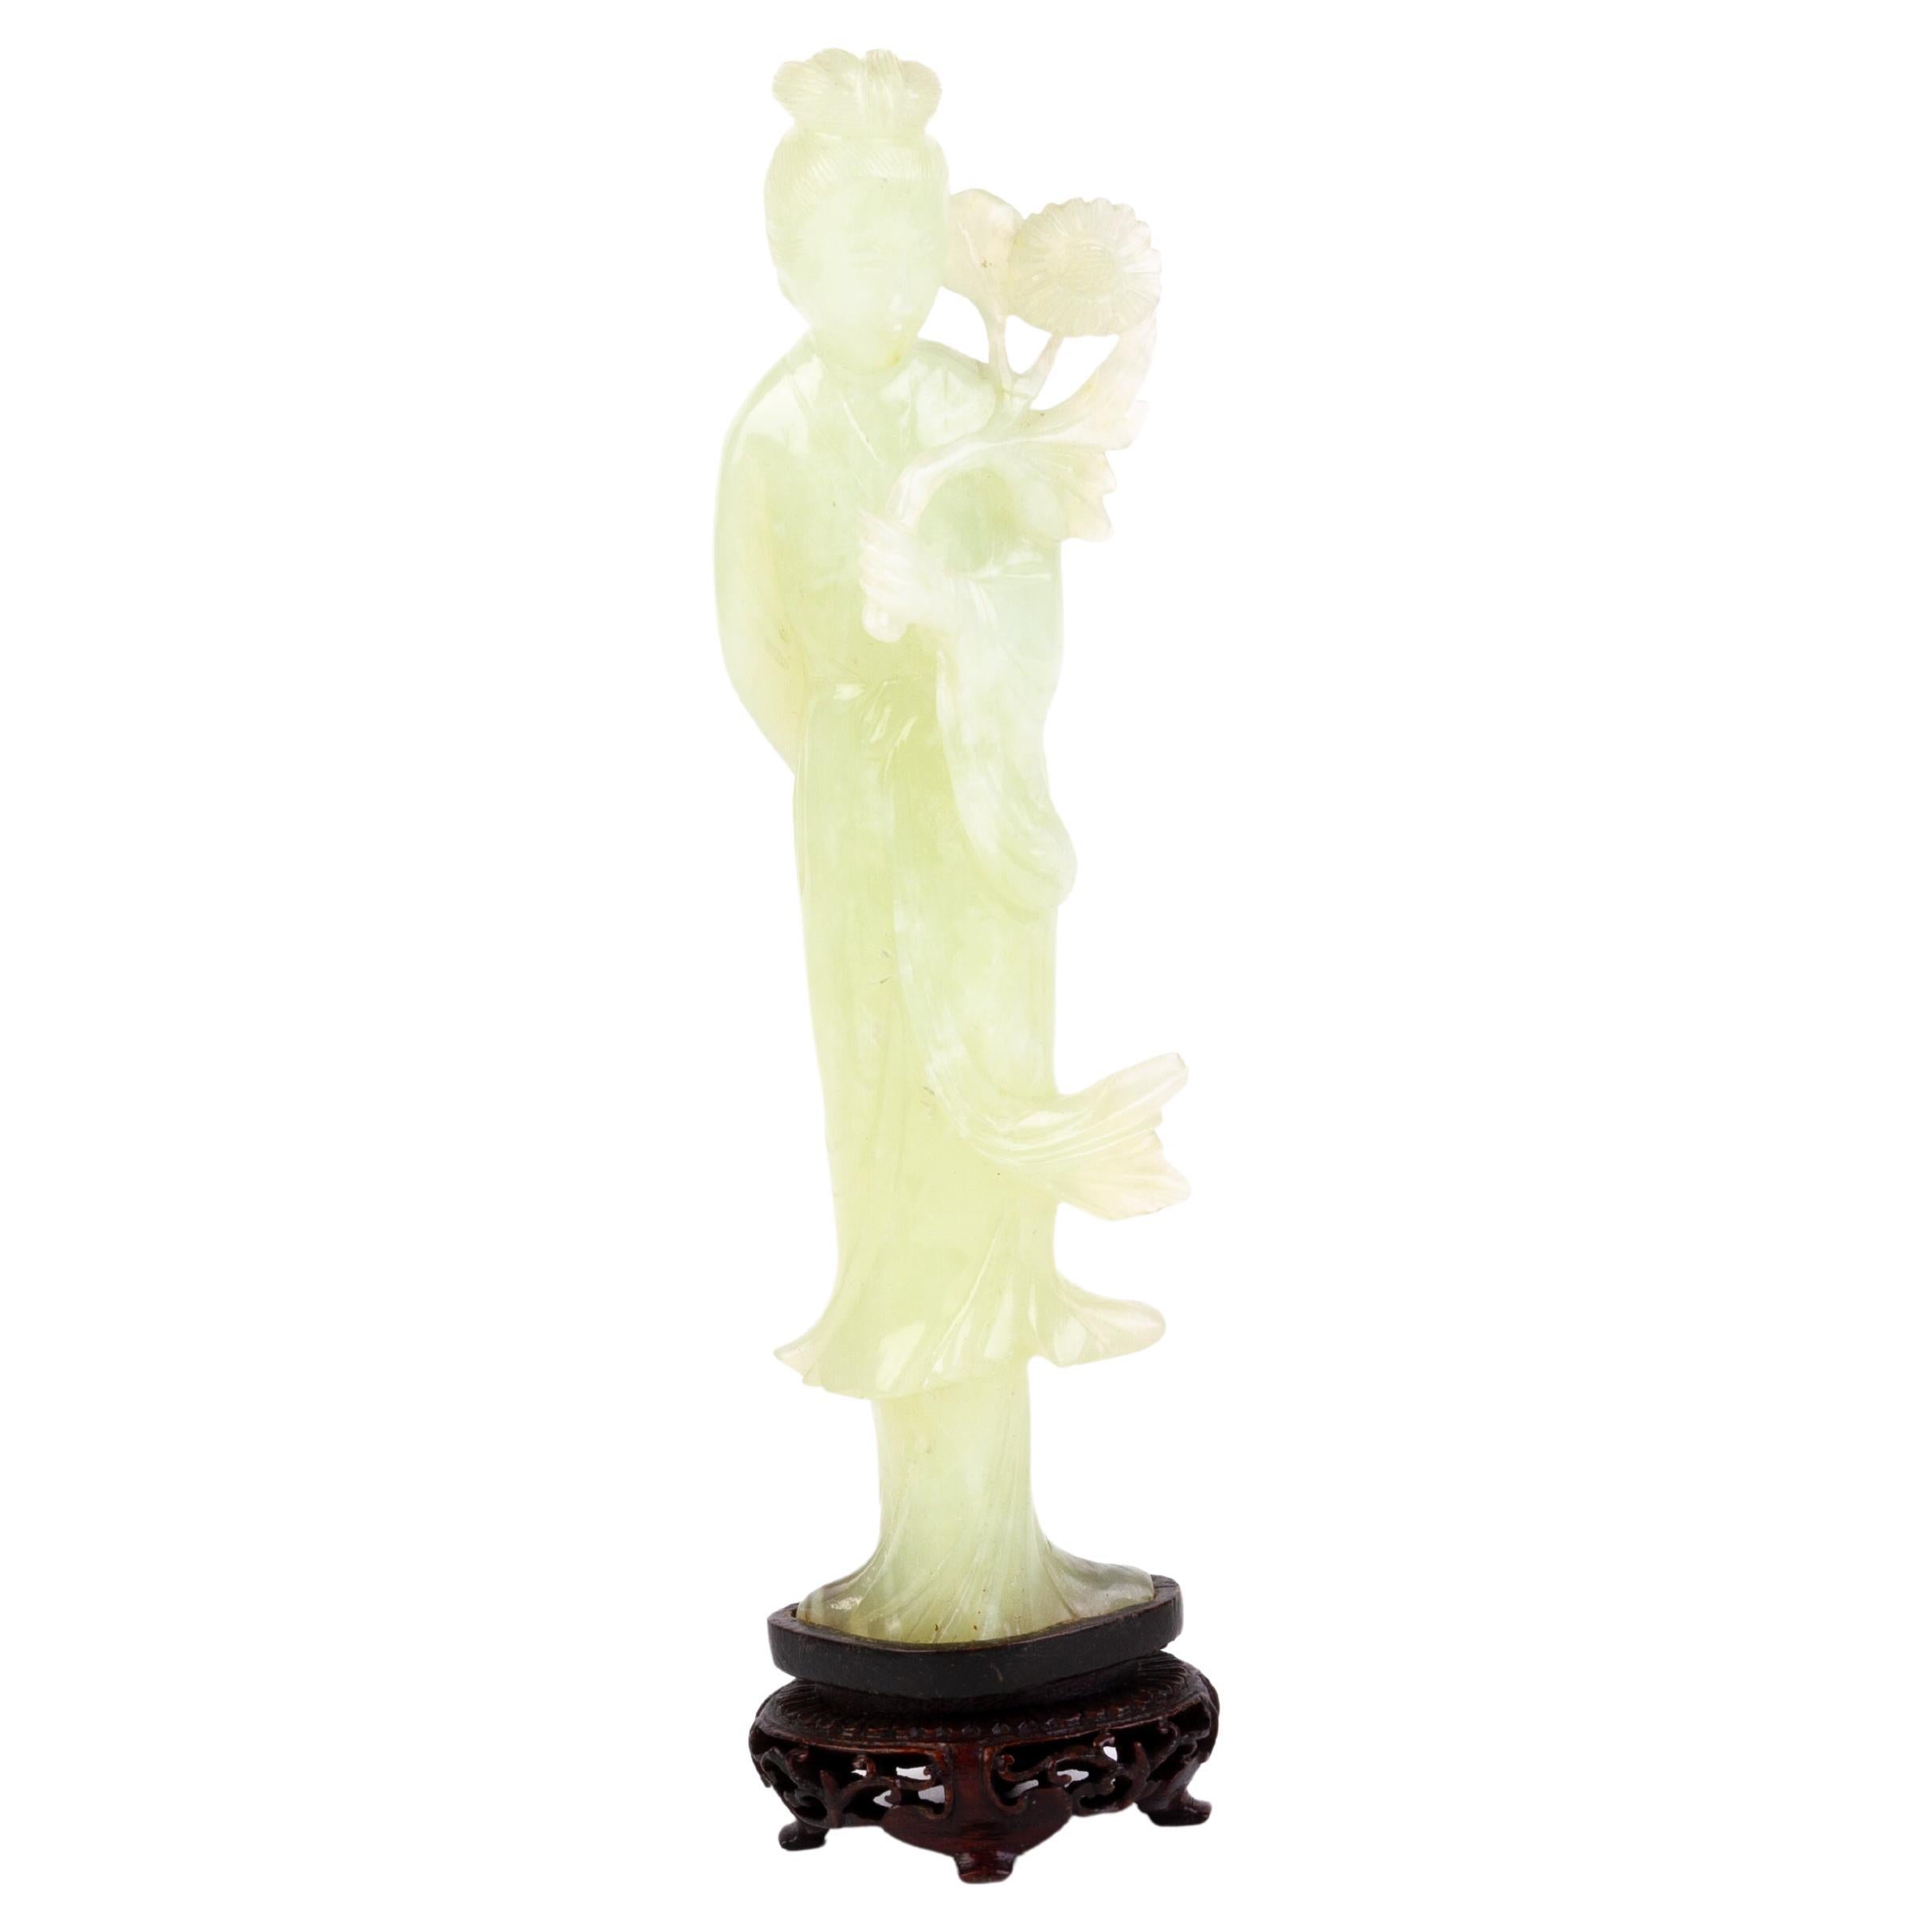 Chinese Qing Dynasty Carved Jade Quanyin Sculpture on Stand 19th Century  For Sale